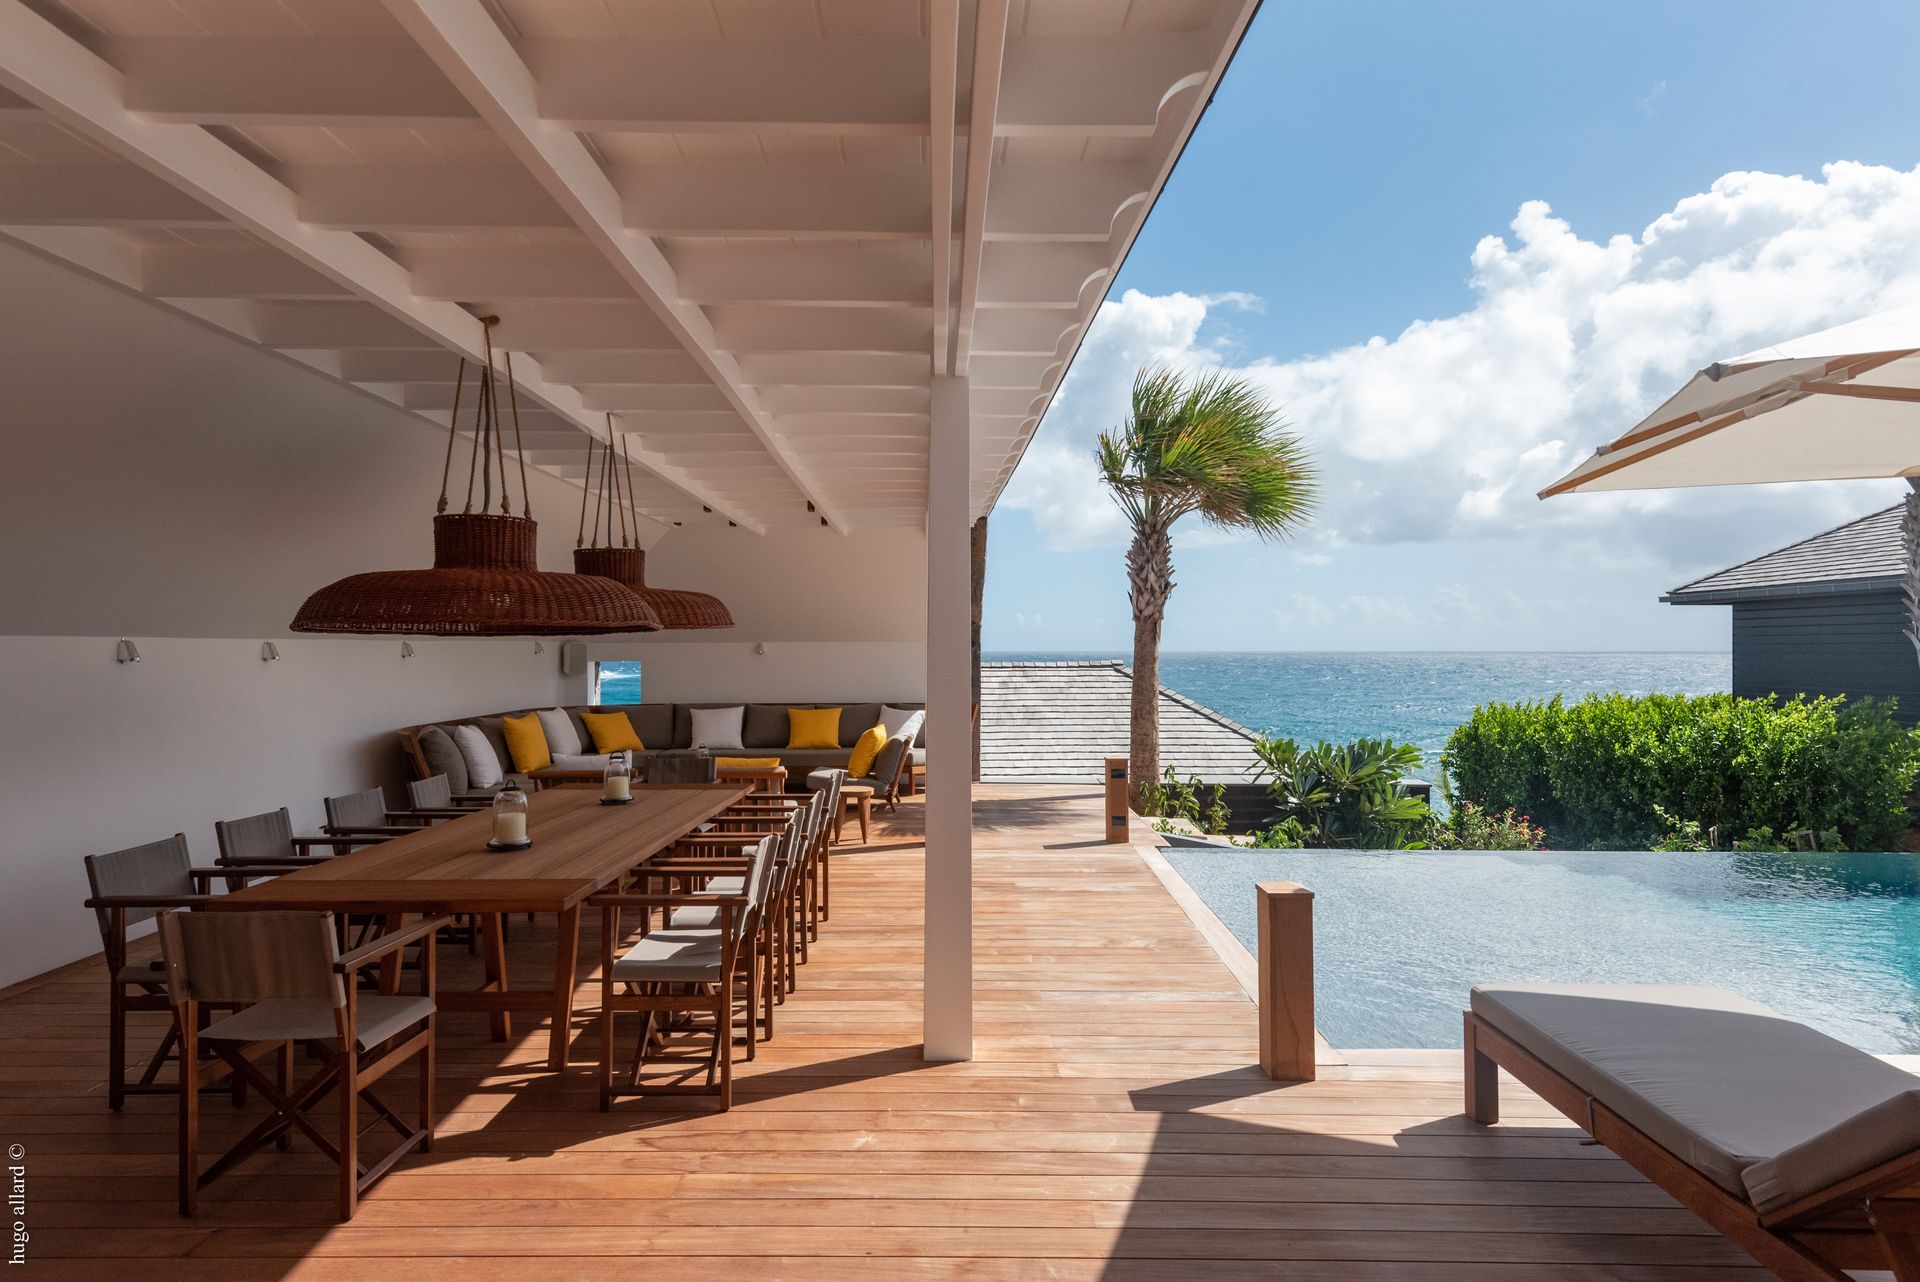 a large wooden deck with a table and chairs overlooking the ocean